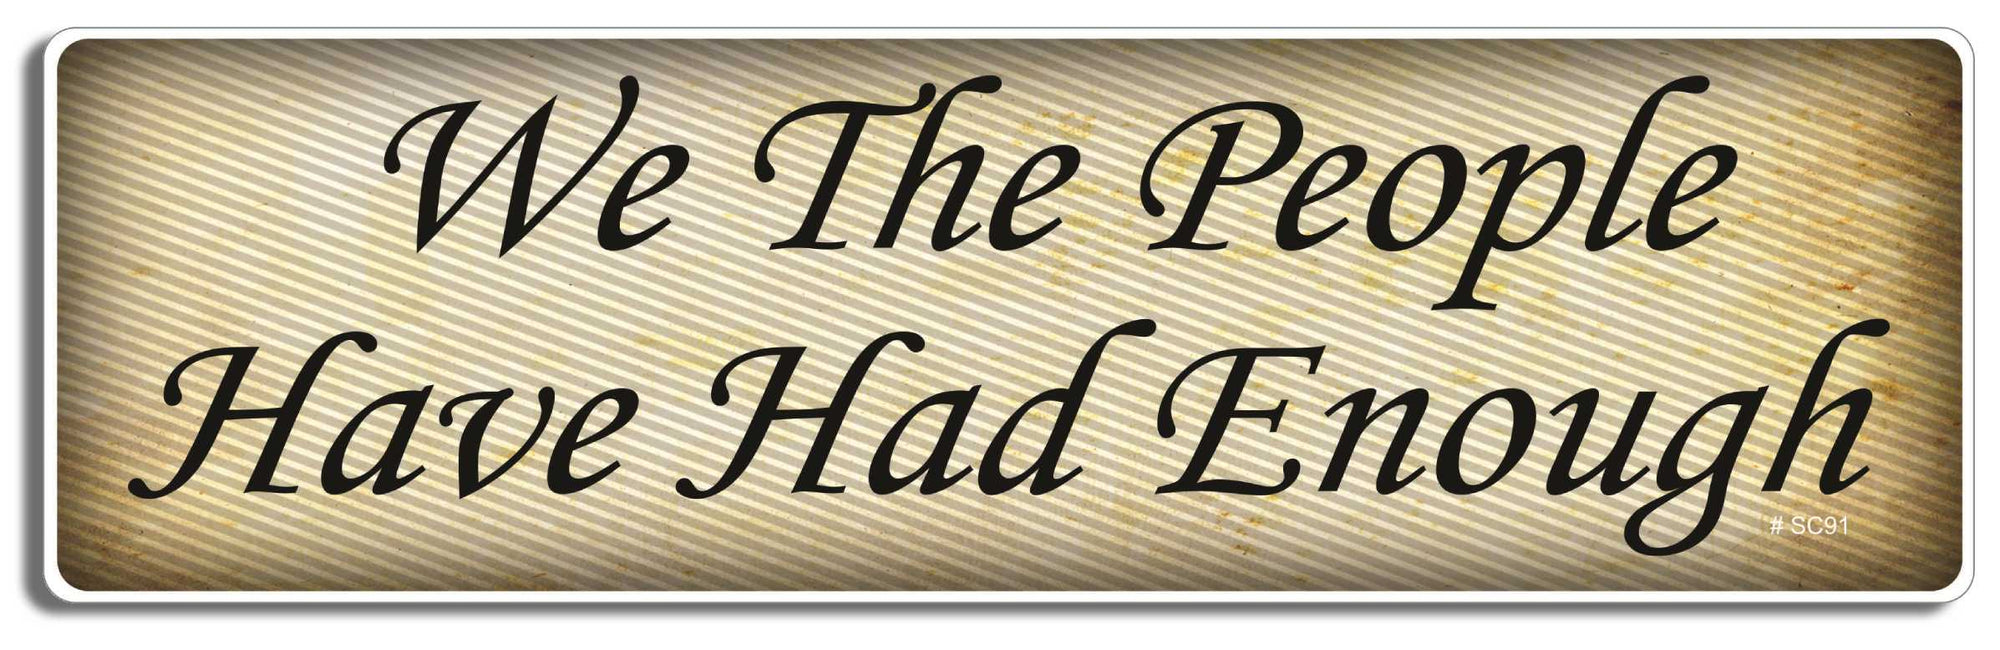 We the people have had enough - 3" x 10" Bumper Sticker--Car Magnet- -  Decal Bumper Sticker-political Bumper Sticker Car Magnet We the people have had enough-  Decal for carsAnti Government, Dissension, Politics